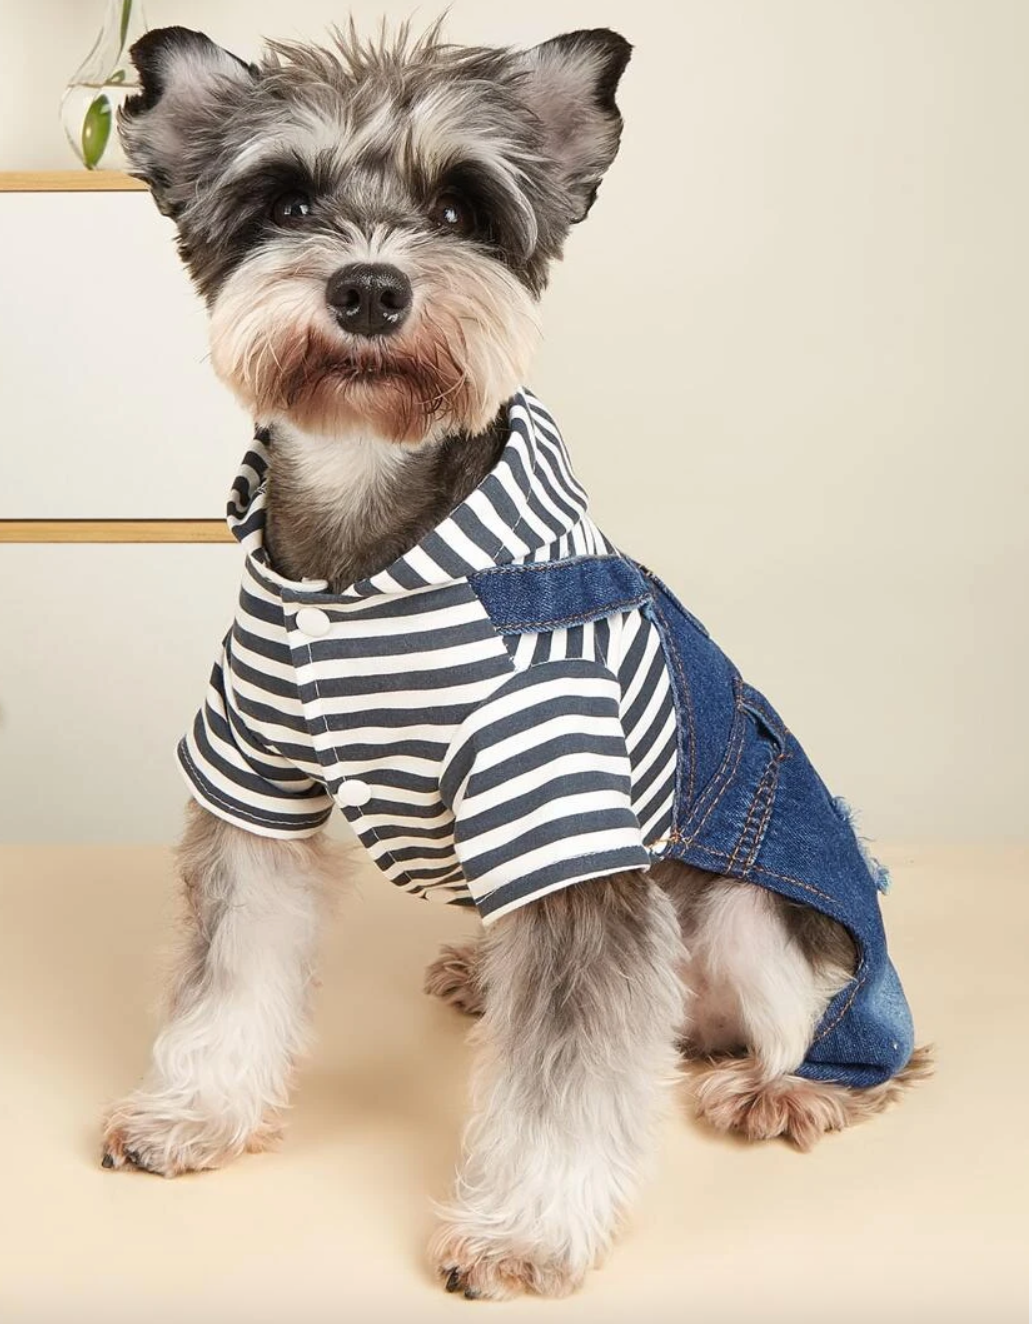 Pet Striped T Shirt and Denim Jeans Dungaree Outfit for Dogs and Cats